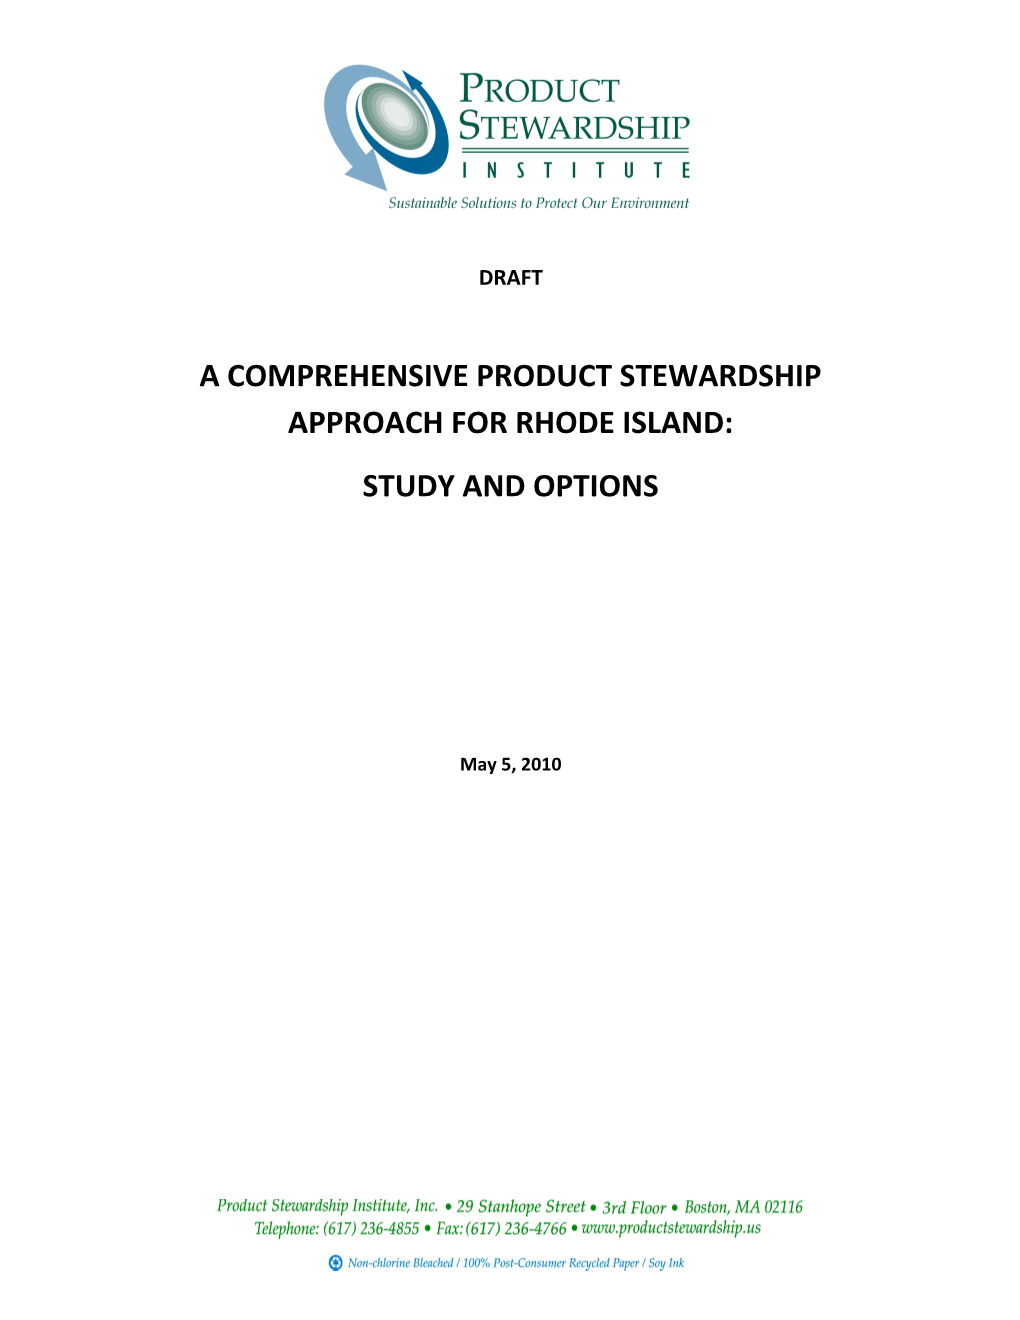 A Comprehensive Product Stewardship Approach for Rhode Island